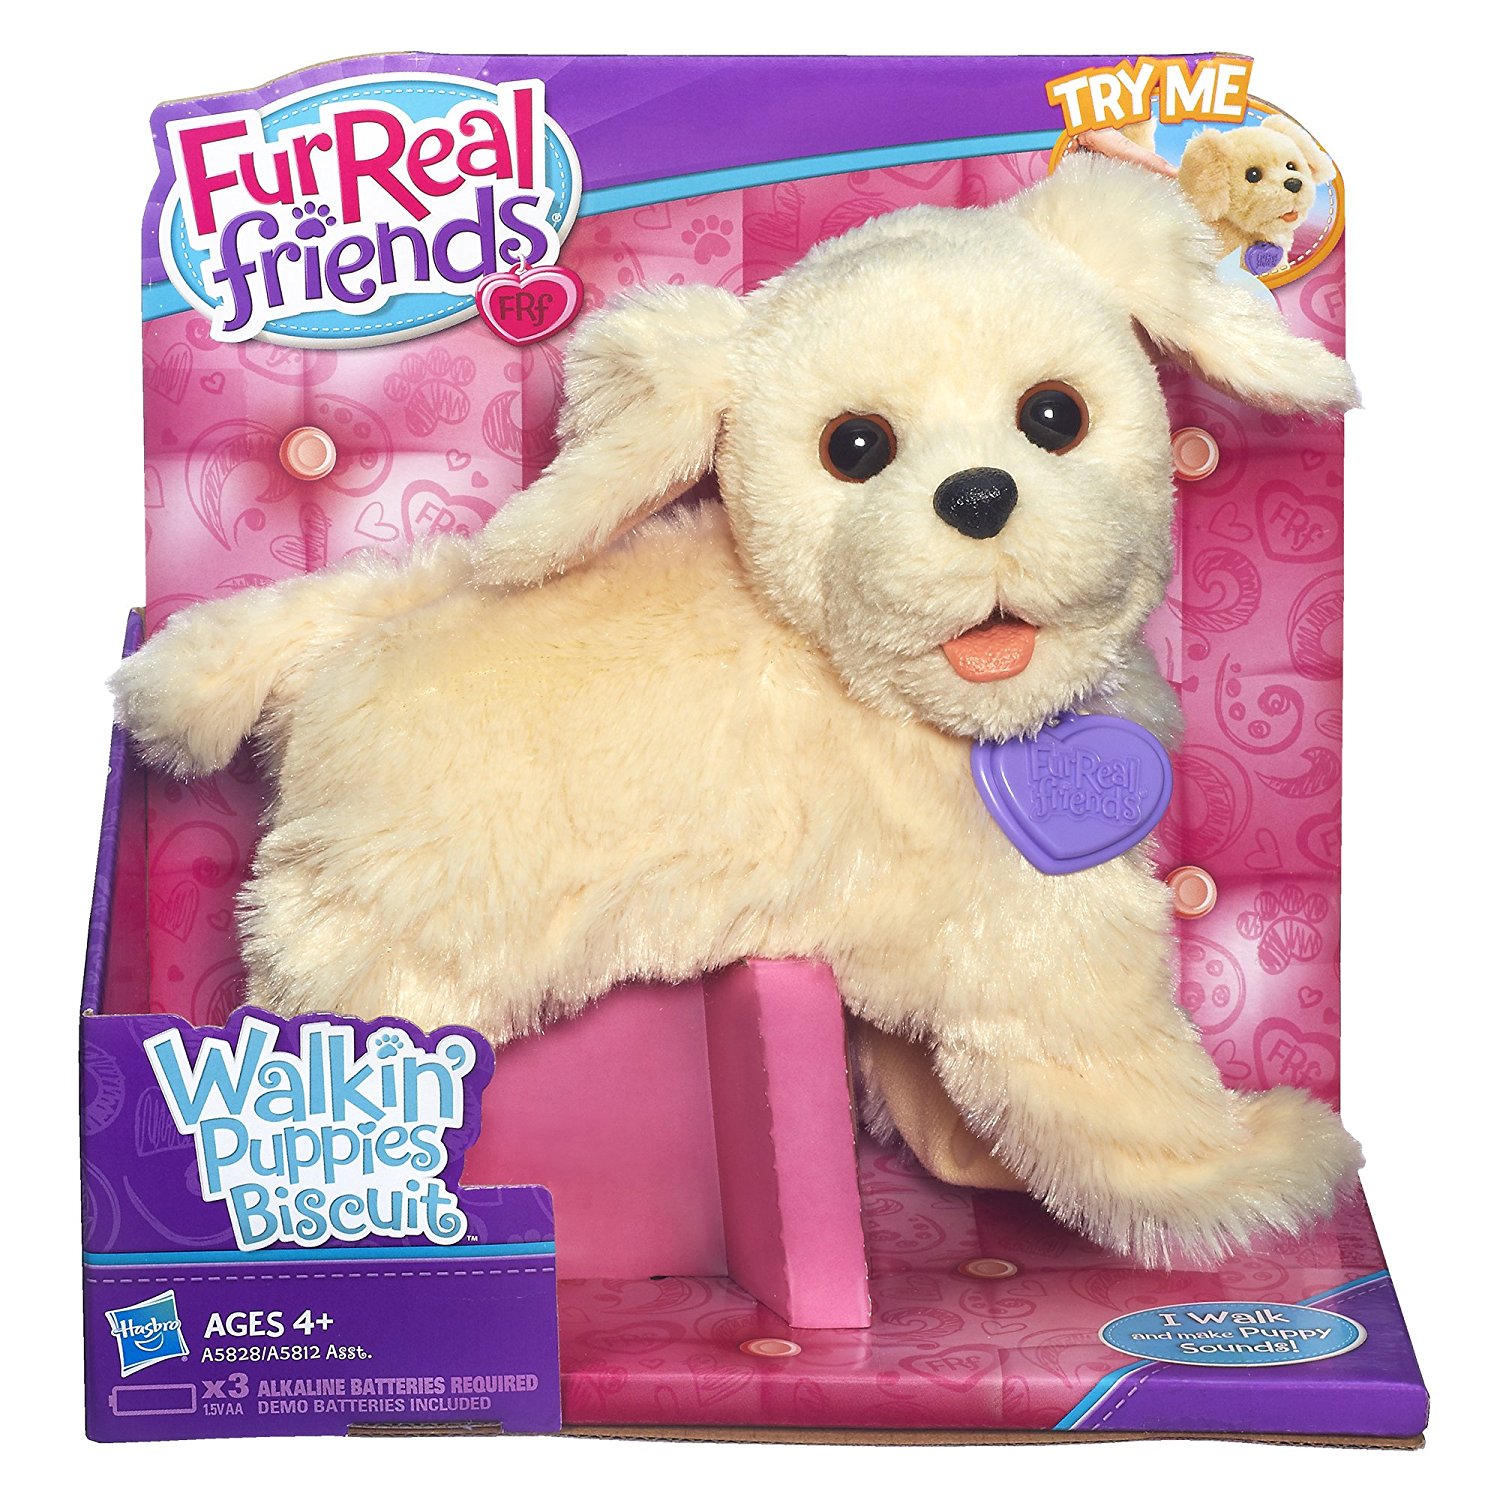 Amazon.com: FurReal Friends Walkin Puppies Biscuit Toy Plush: Toys ...